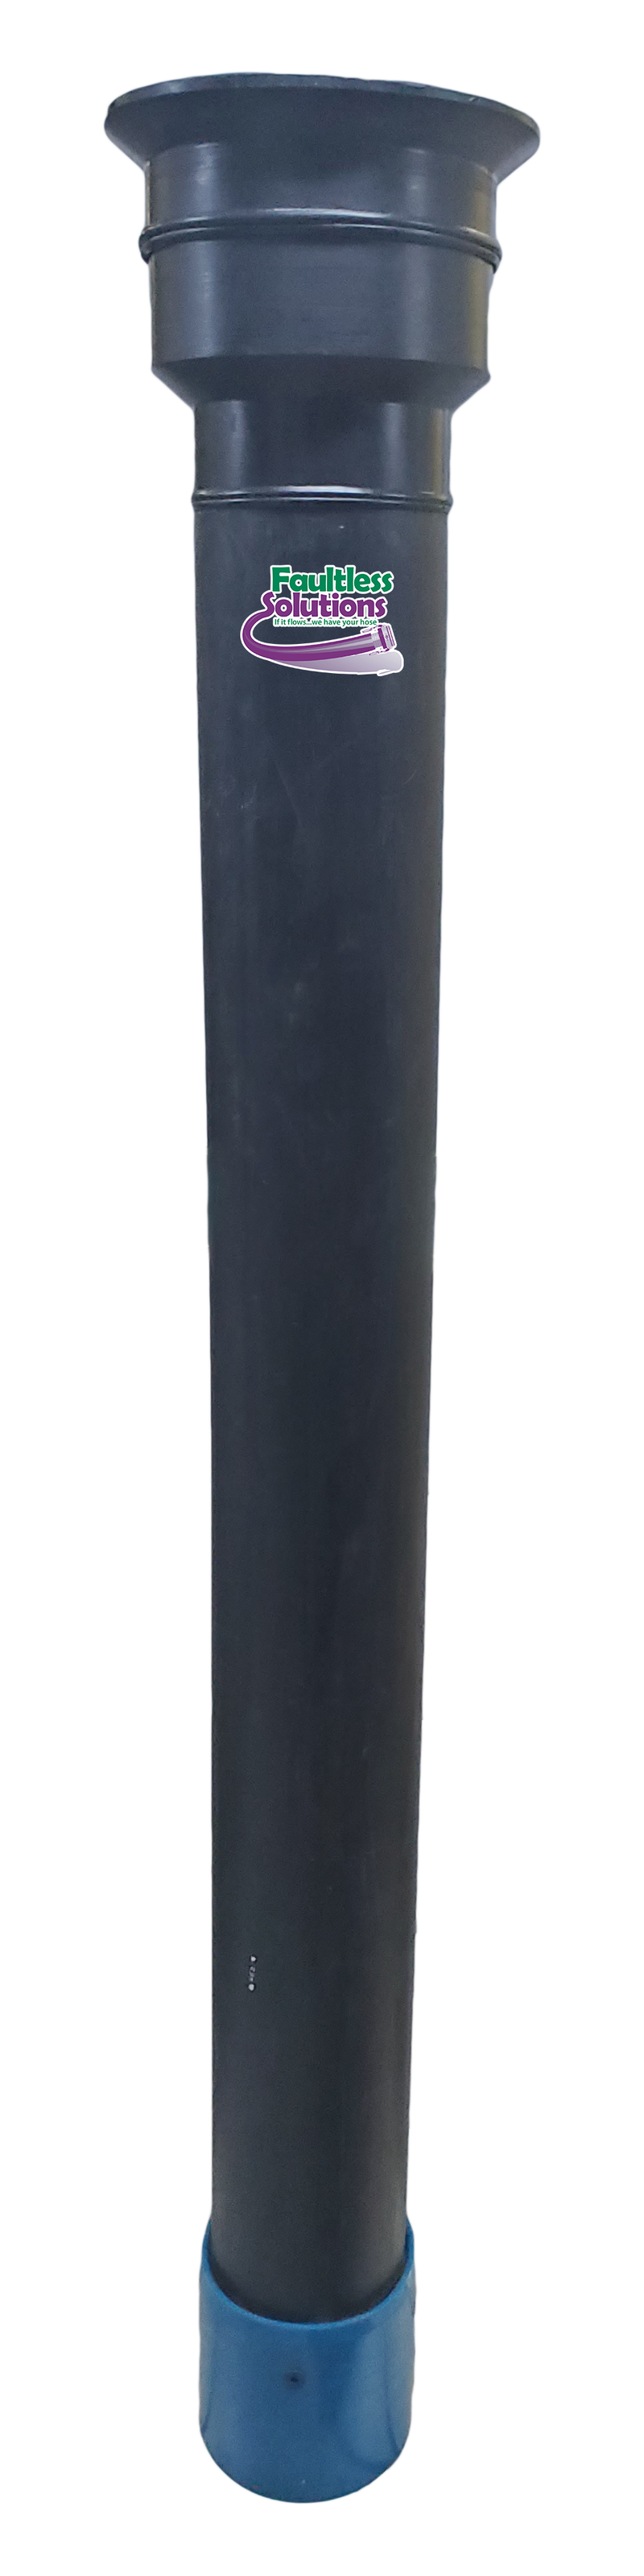 8in to 6in HDPE Reducer Polyethylene Plastic Dig Tube/Pipe for Hydro-Excavation (Hydrovac) - 6in tube with 8in Vactor Flange x Cuff (Urethane) - Overall Length/Height is 78in